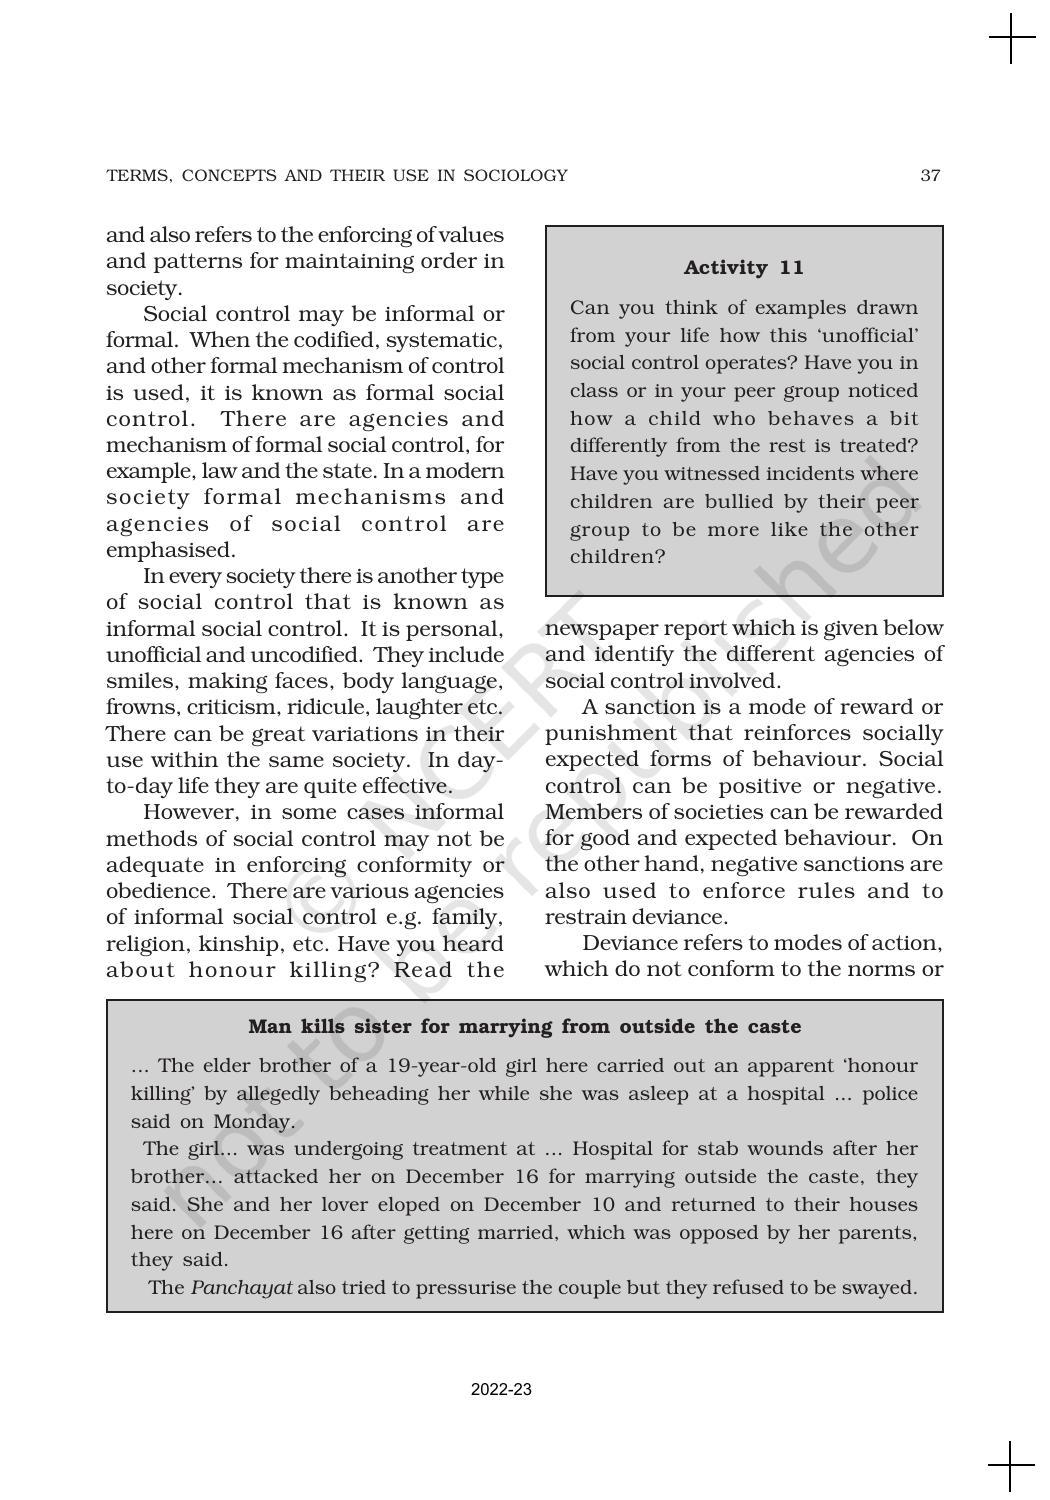 NCERT Book for Class 11 Sociology (Part-I) Chapter 2 Terms, Concepts and Their Use in Sociology - Page 14